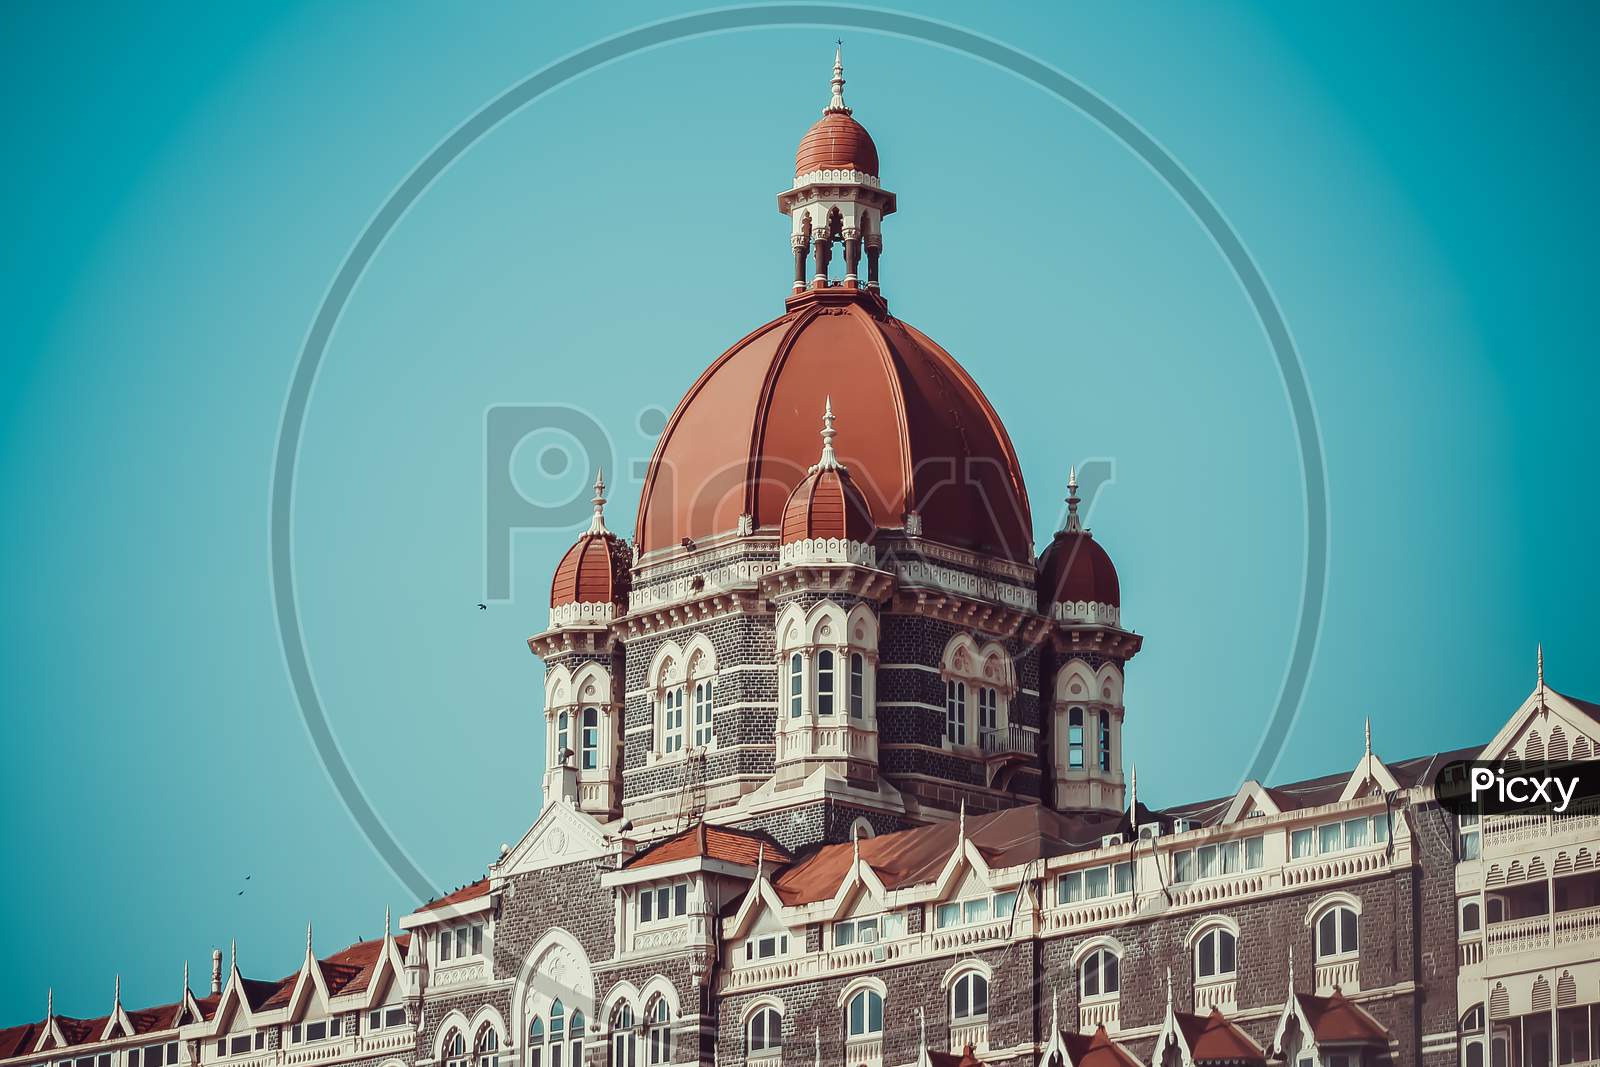 The Taj Mahal Hotel In The City Cente, The Gateway Of India